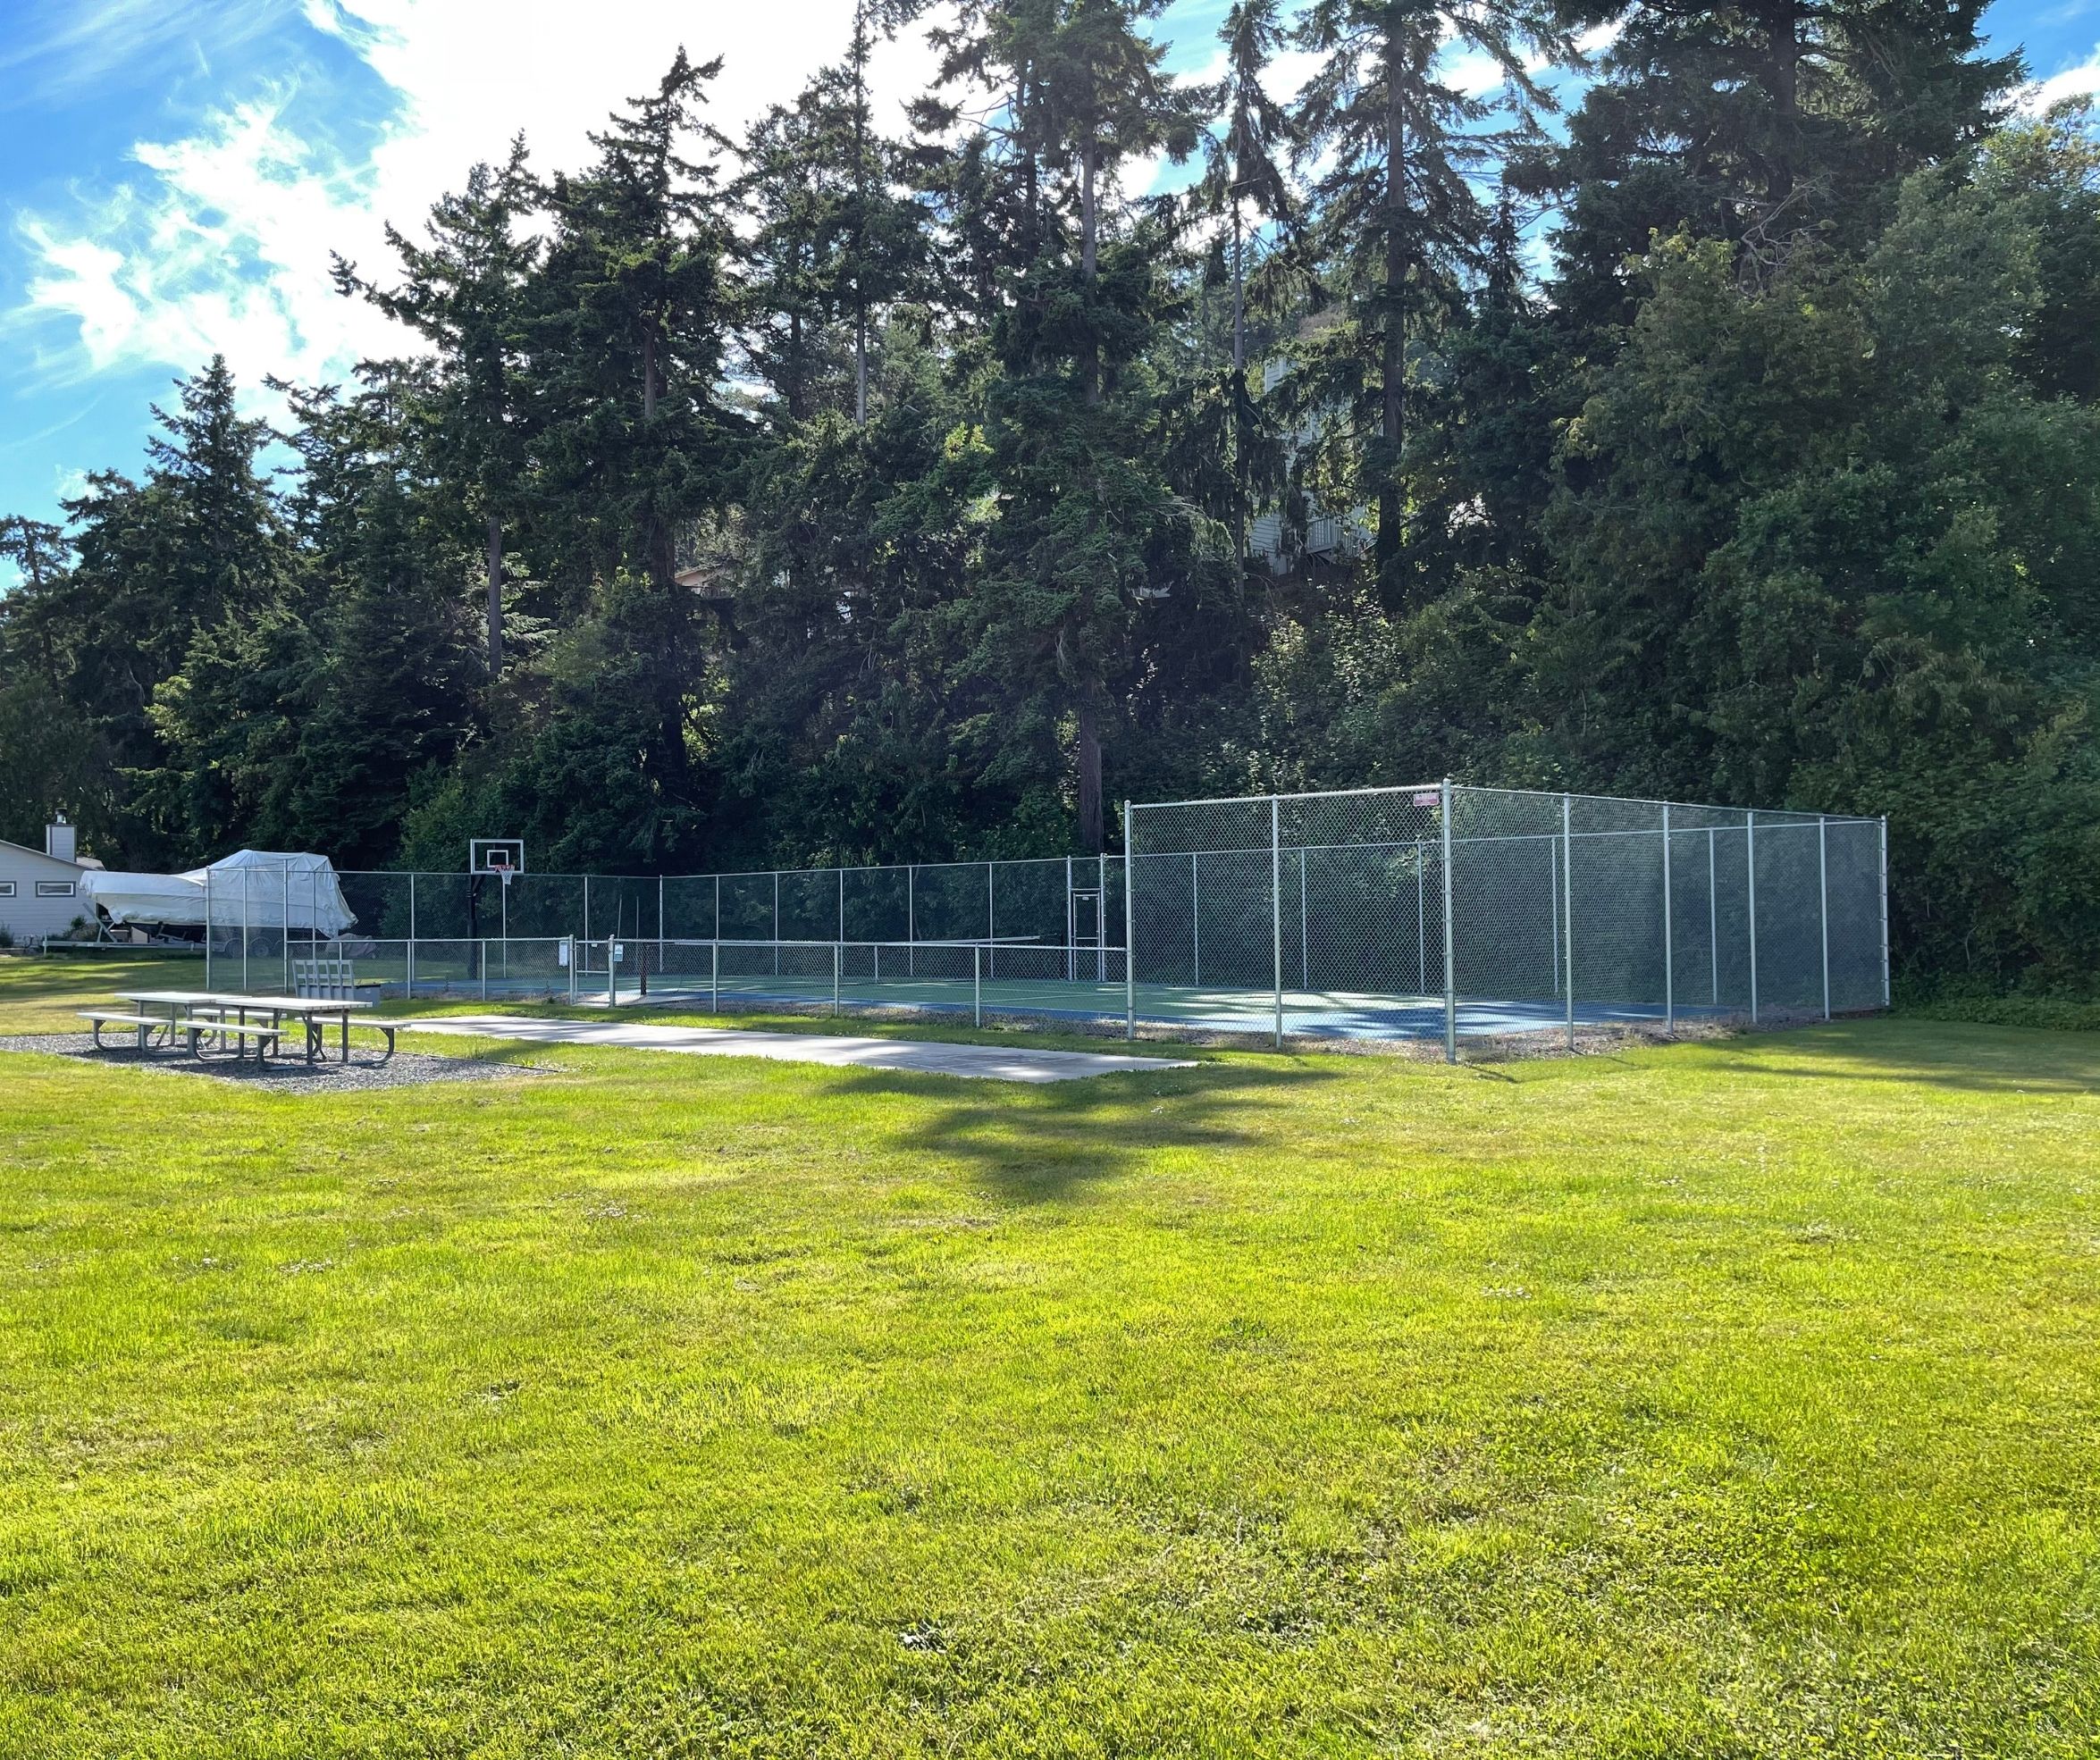 Whidbey Island, Washington, community, Mariners Cove, Neighborhood, tennis court, Windermere Real estate, Homes on Whidbey